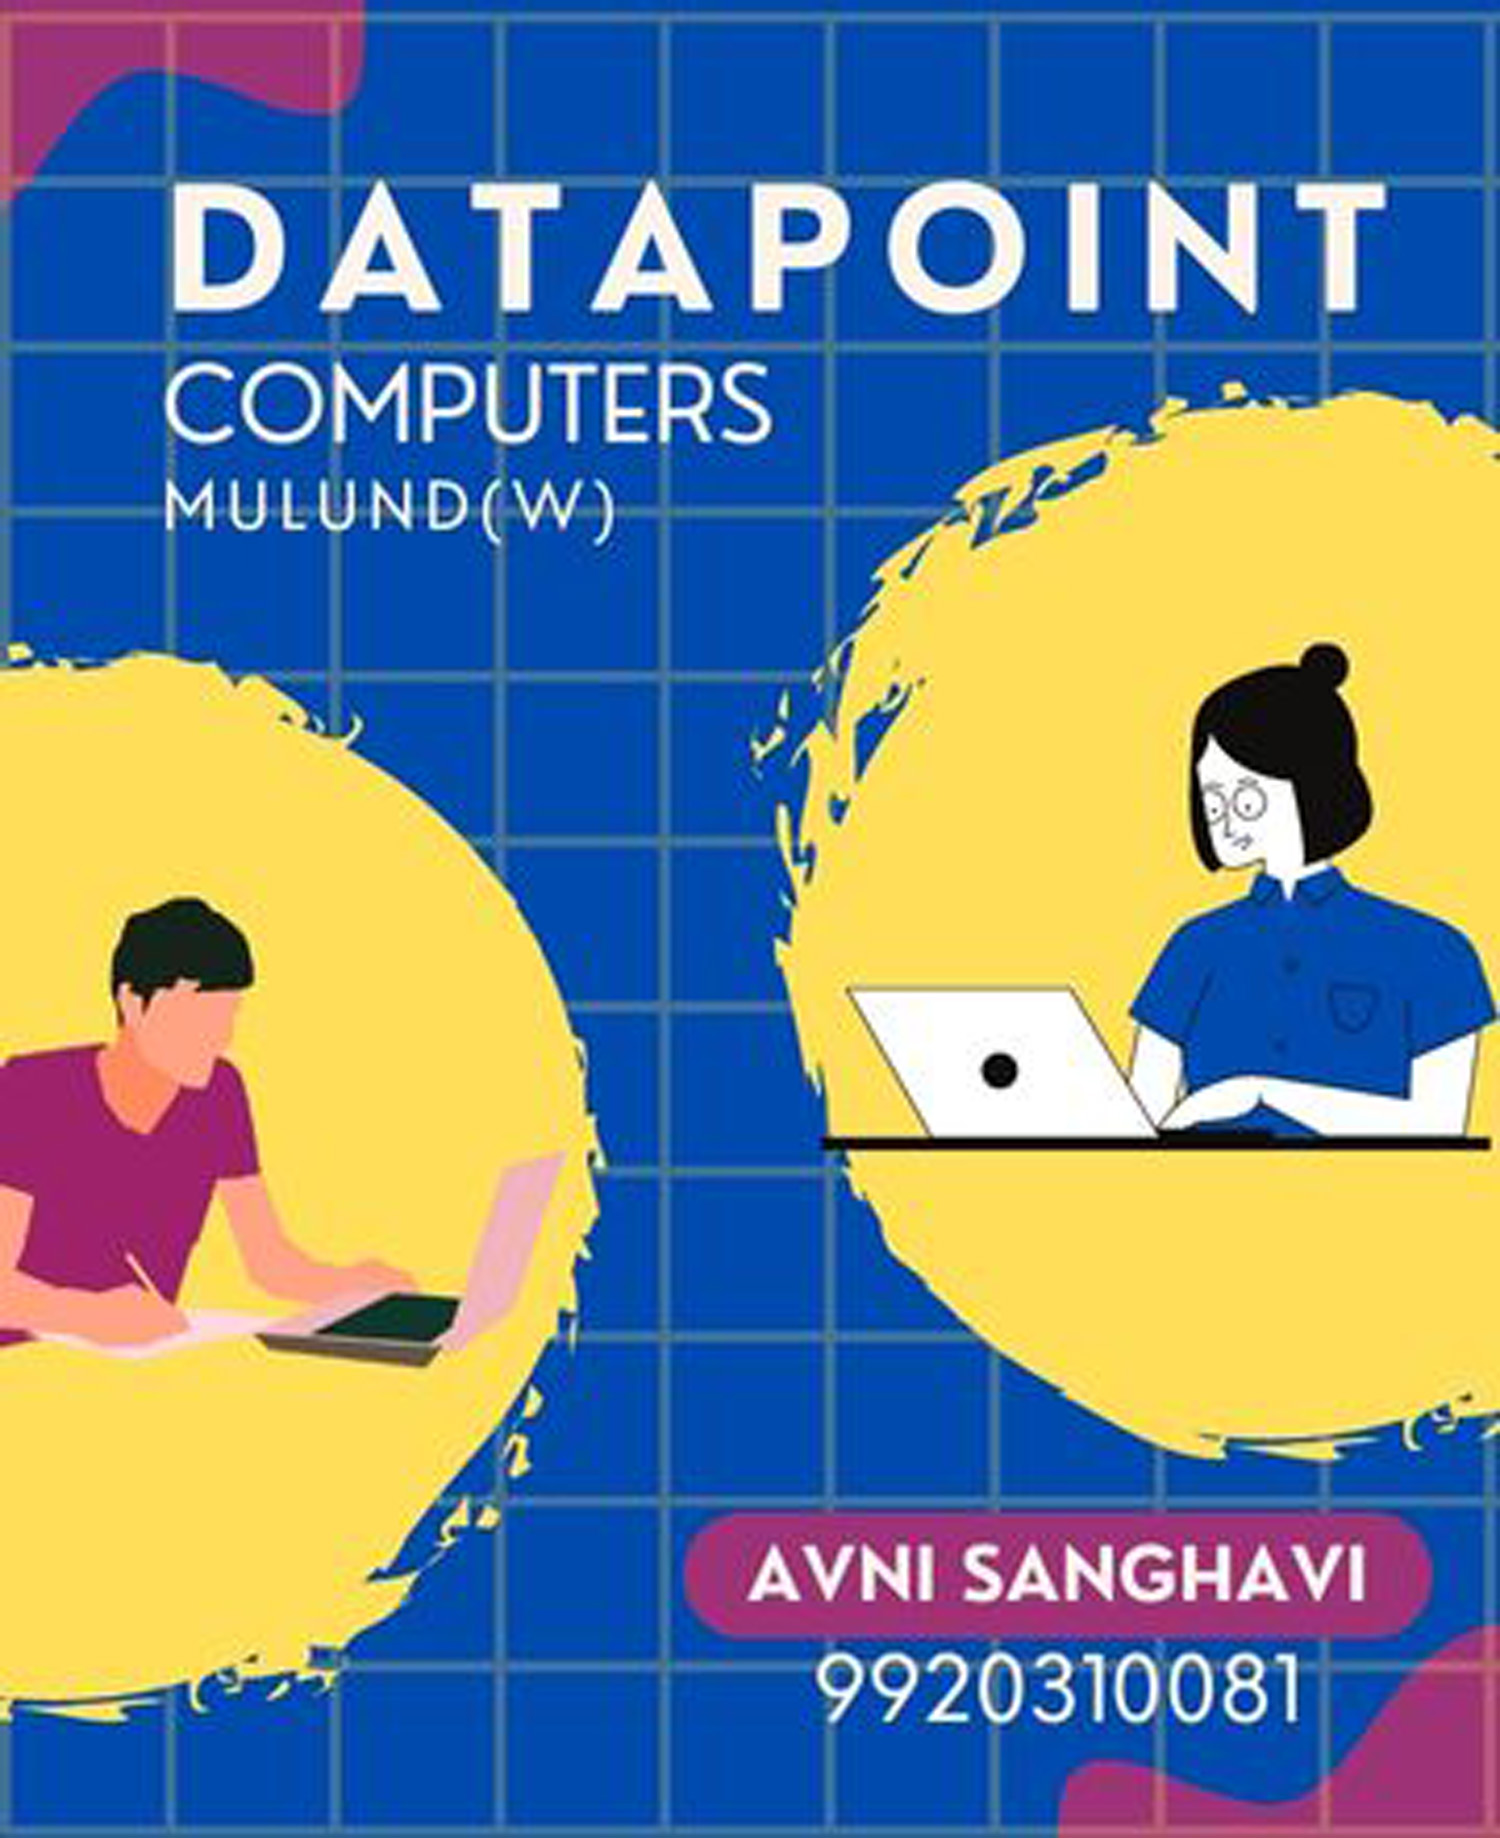 Explore Exciting Vacation Computer Courses: Technology, Design, Marketing, and More! at DATAPOINT COMPUTERS MULUND(W)